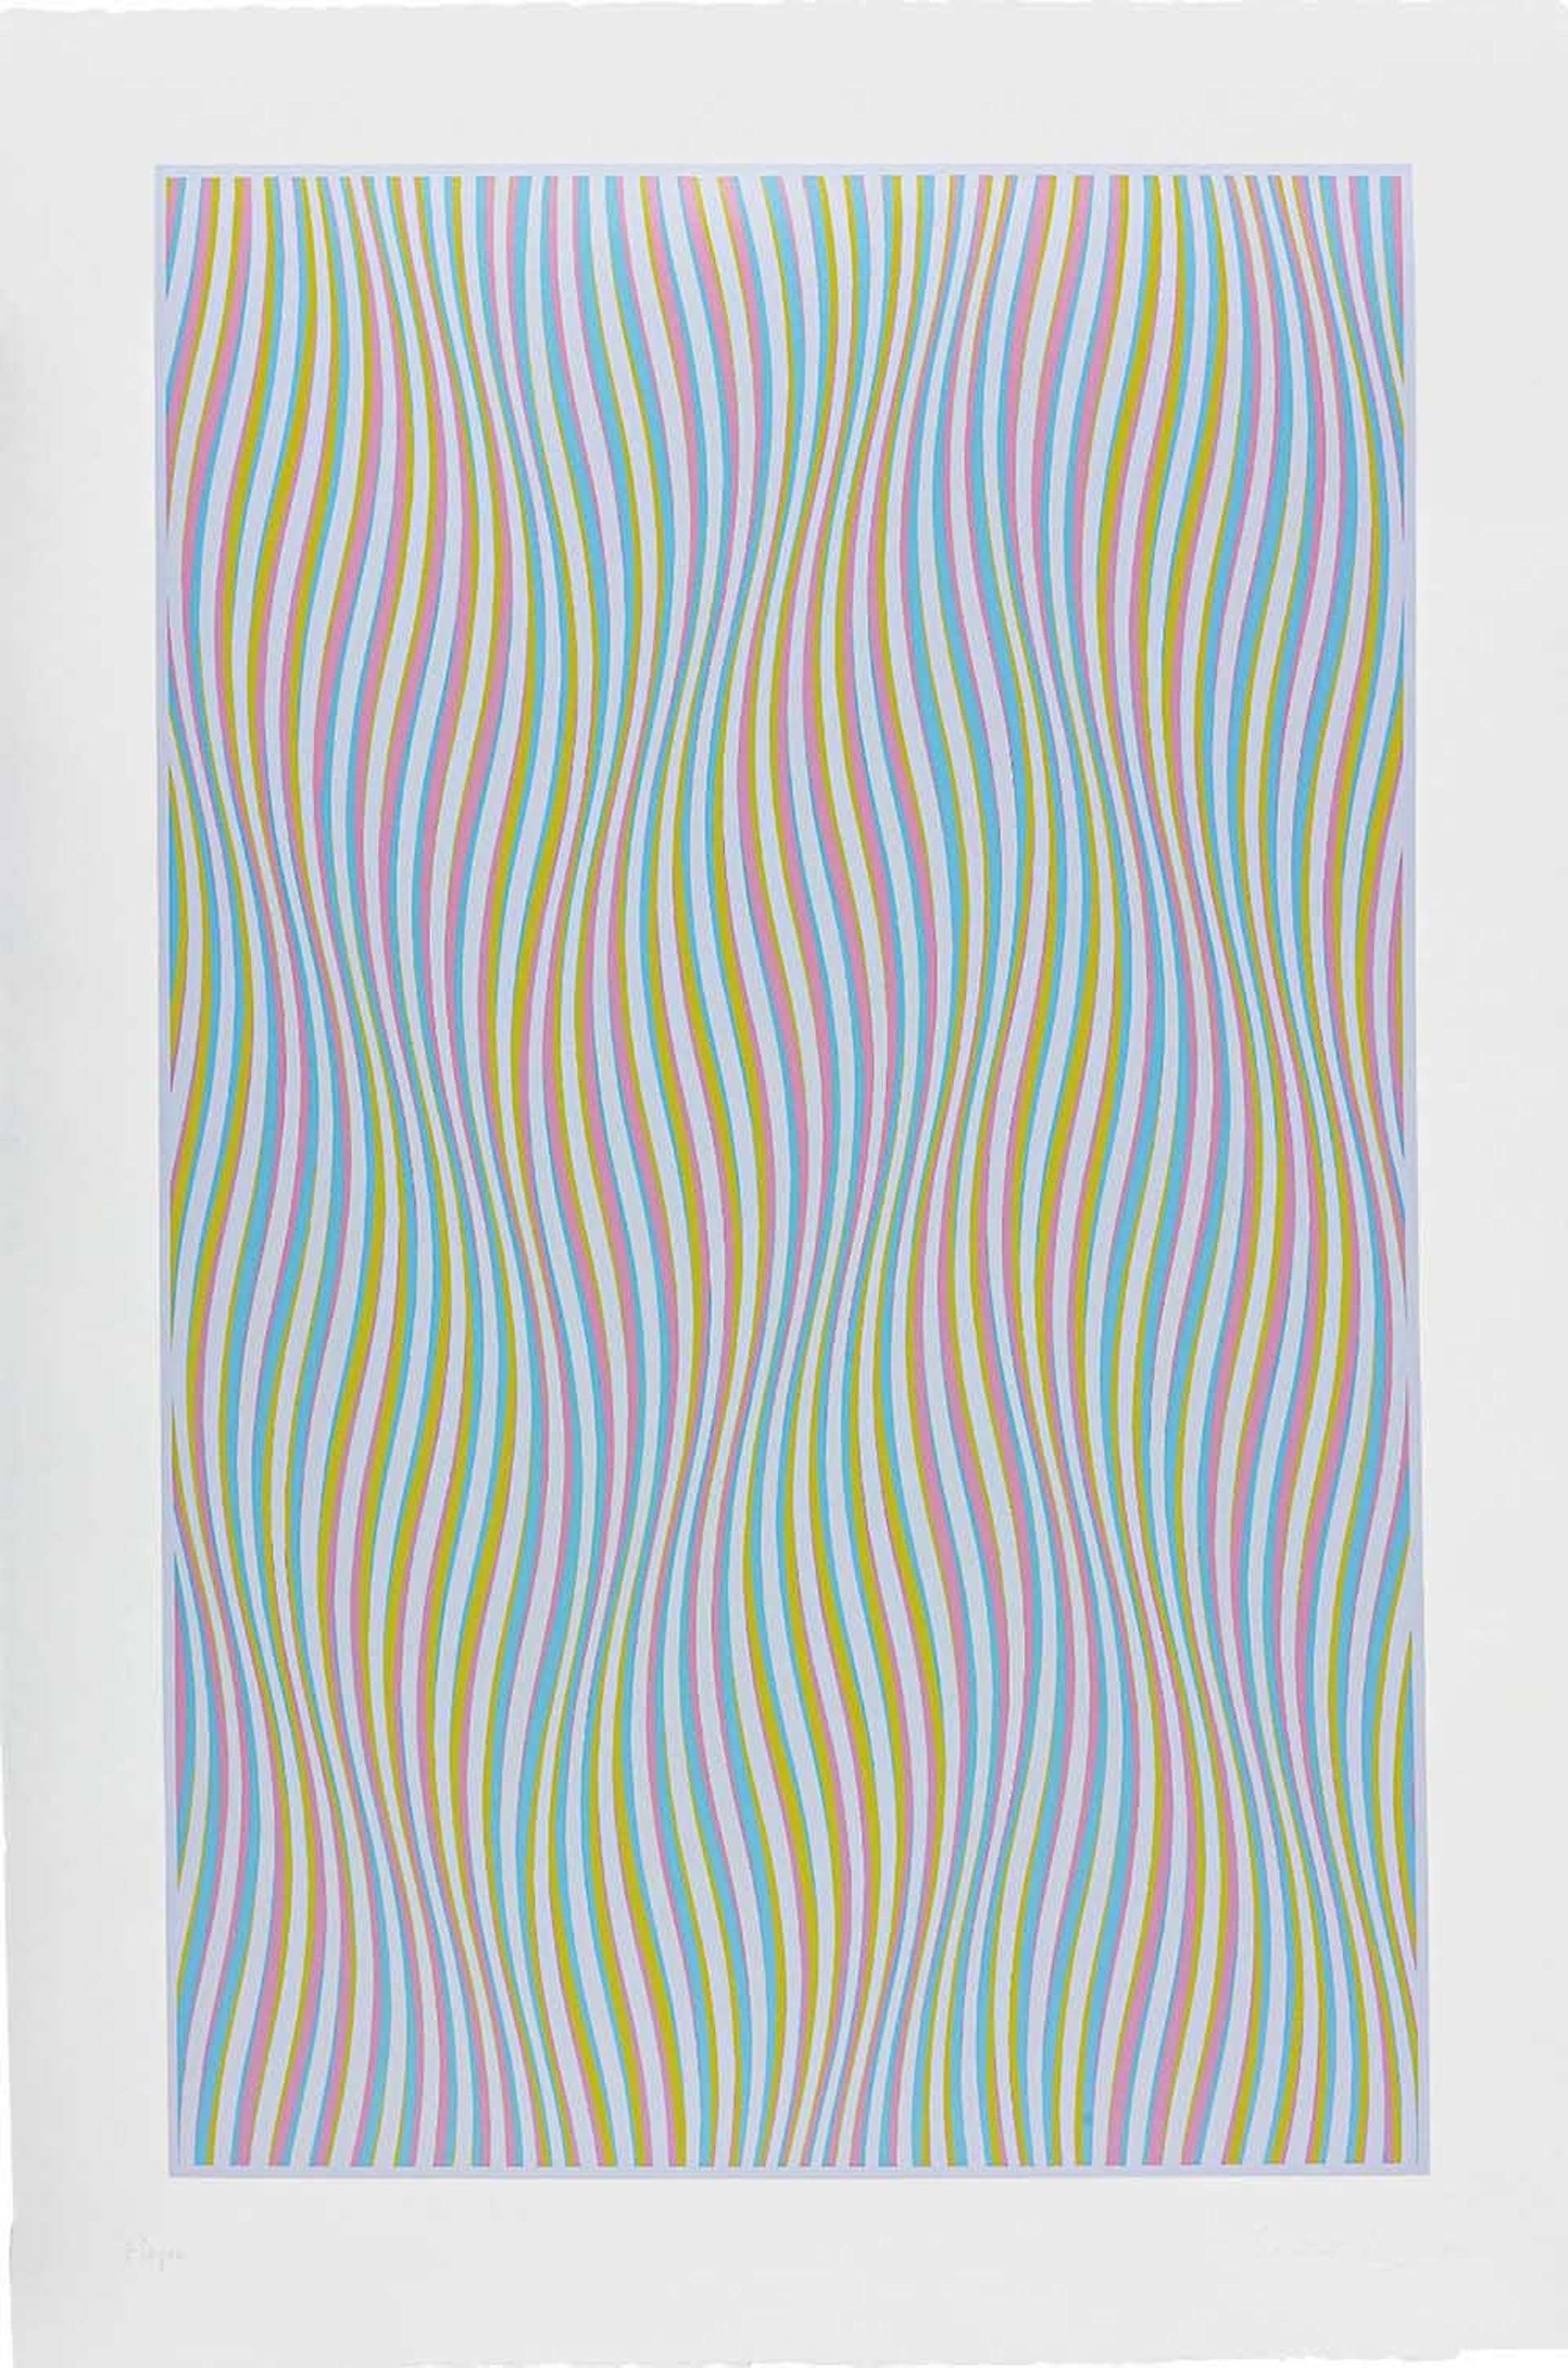 A series of fine, wavy colourful lines, creating an optical illusion.